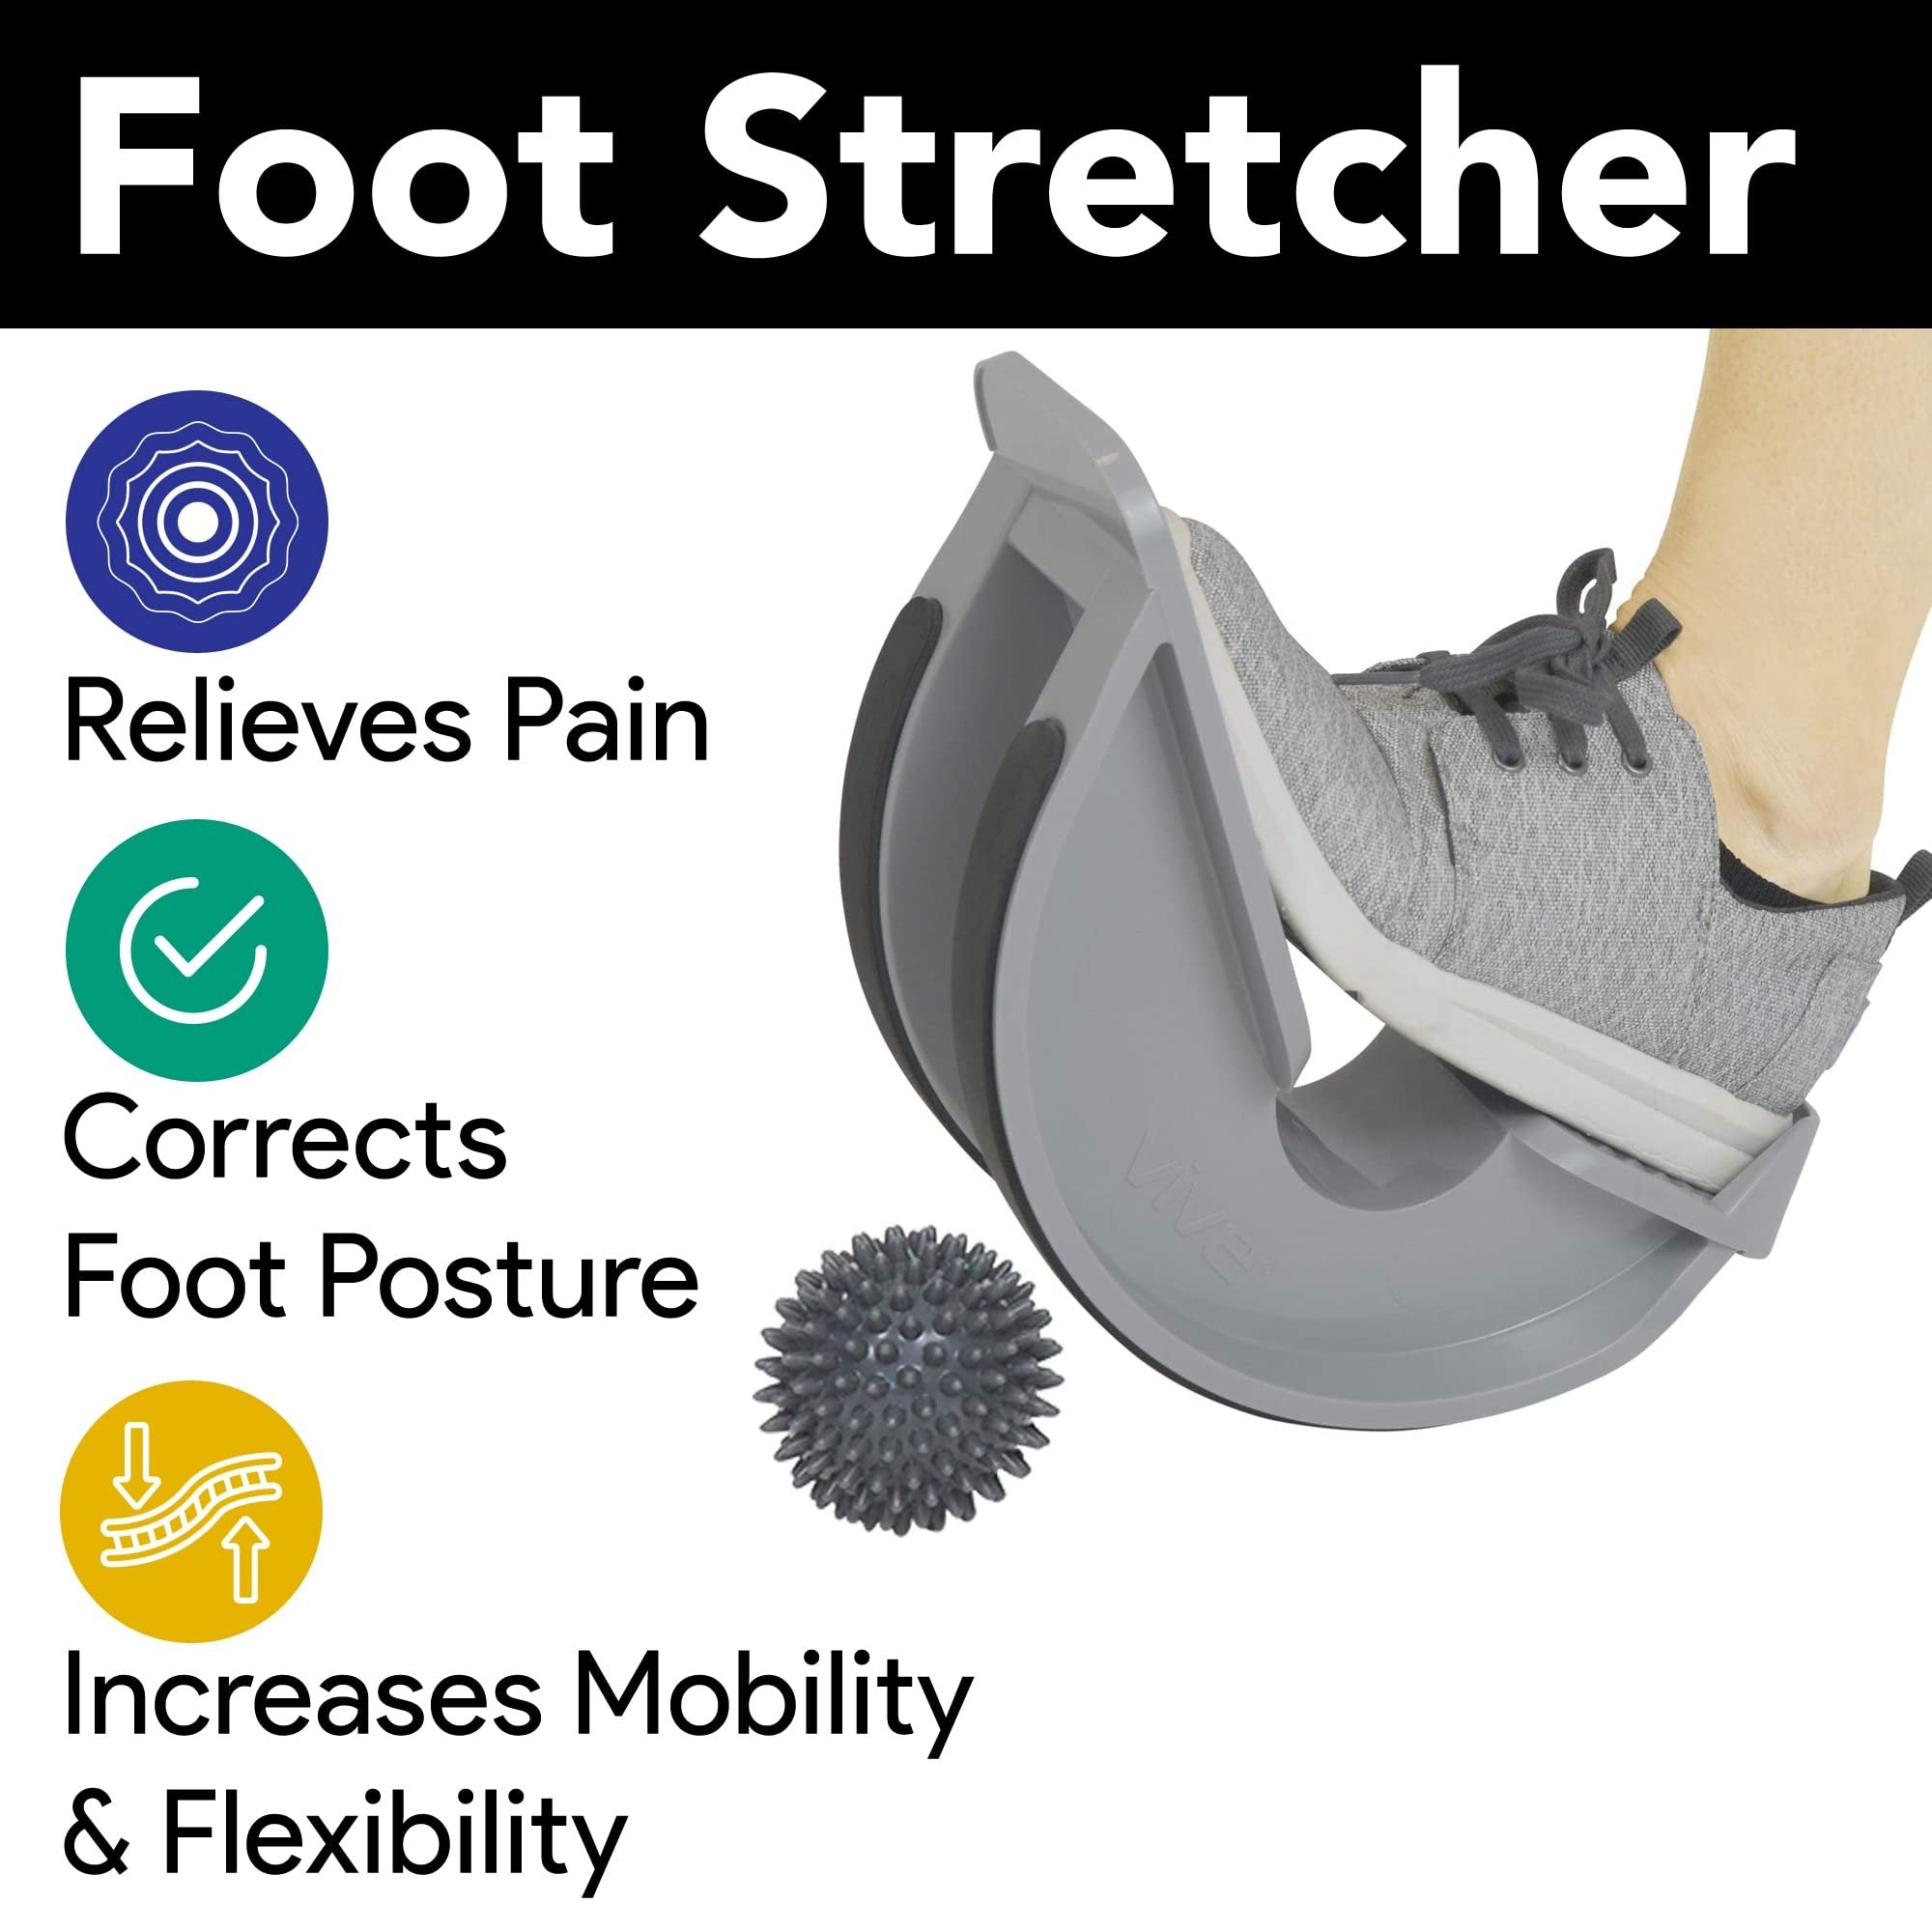 ProHeal Pink Plantar Fasciitis Relief Foot Rocker - Calf Stretcher with Spiked Ball Massager - Achilles Tendonitis Calf, Foot, Heel, and Ankle Stretcher - Lower Leg Pain Relief